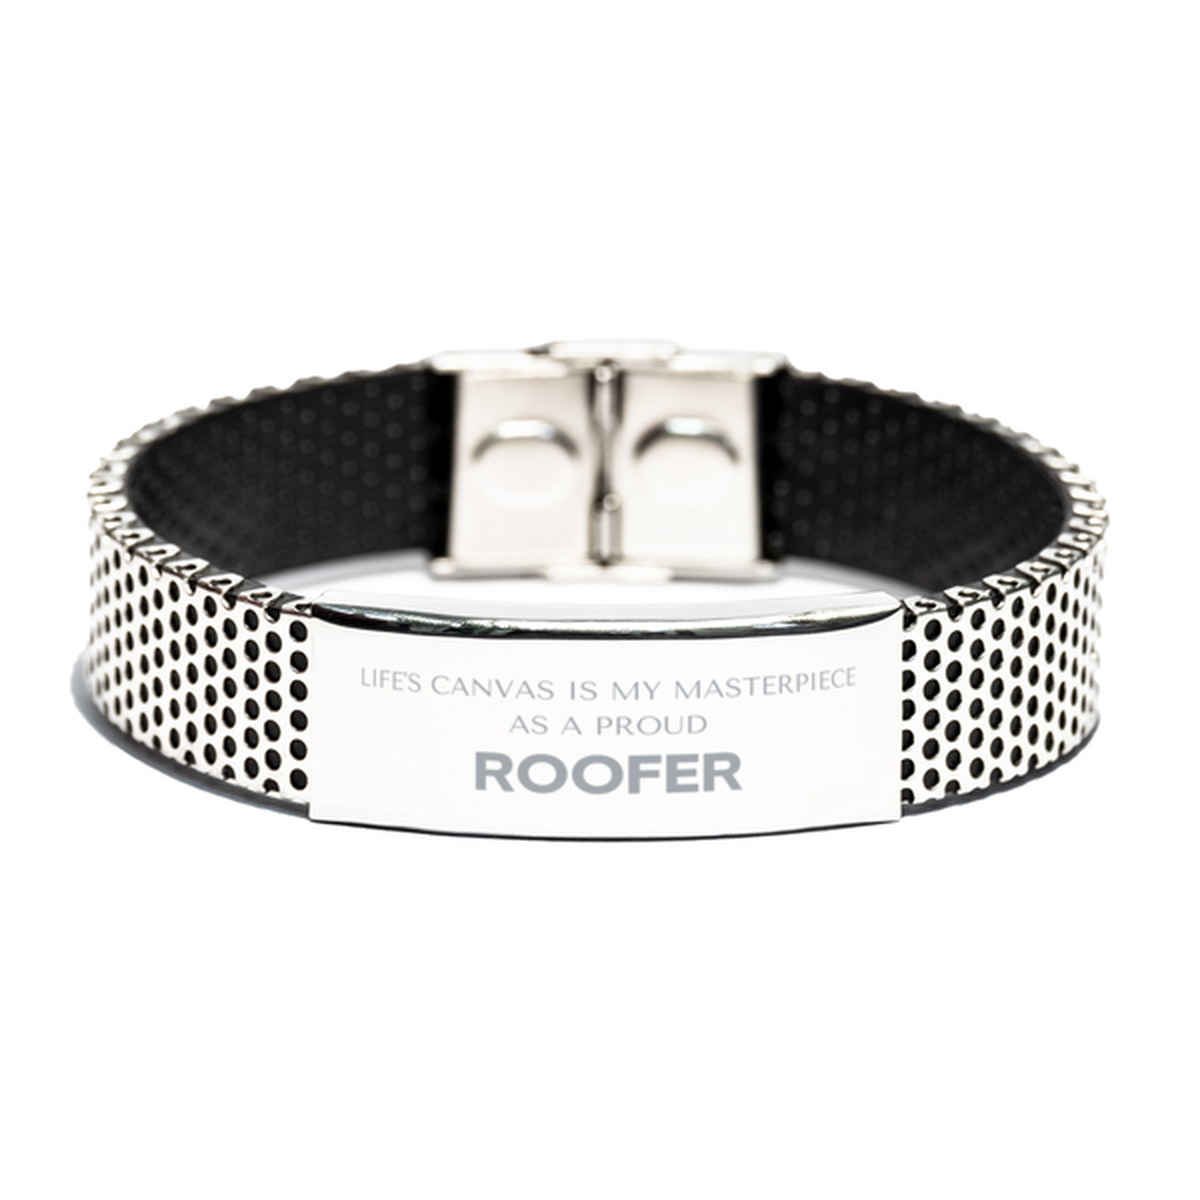 Proud Roofer Gifts, Life's canvas is my masterpiece, Epic Birthday Christmas Unique Stainless Steel Bracelet For Roofer, Coworkers, Men, Women, Friends